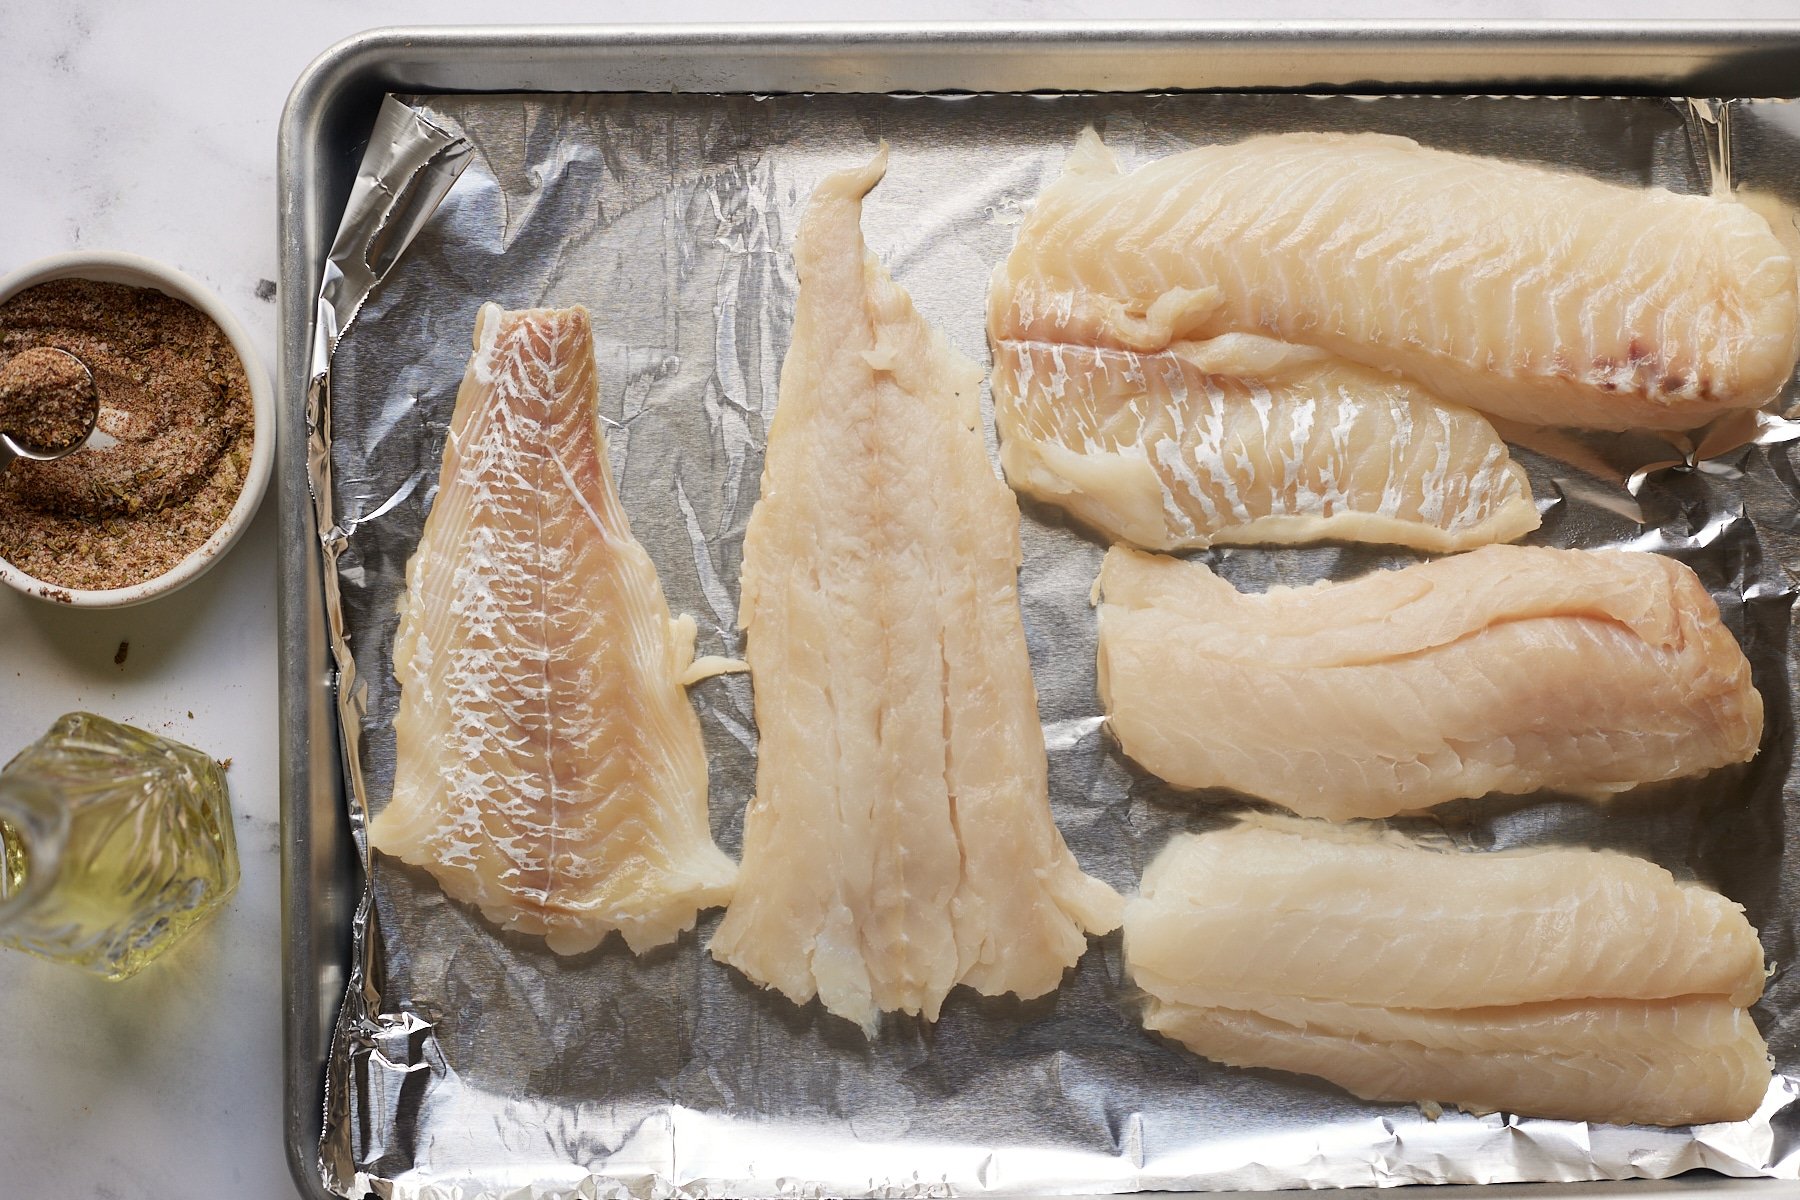 Fish fillets on a lined baking tray next to seasoning and oil.